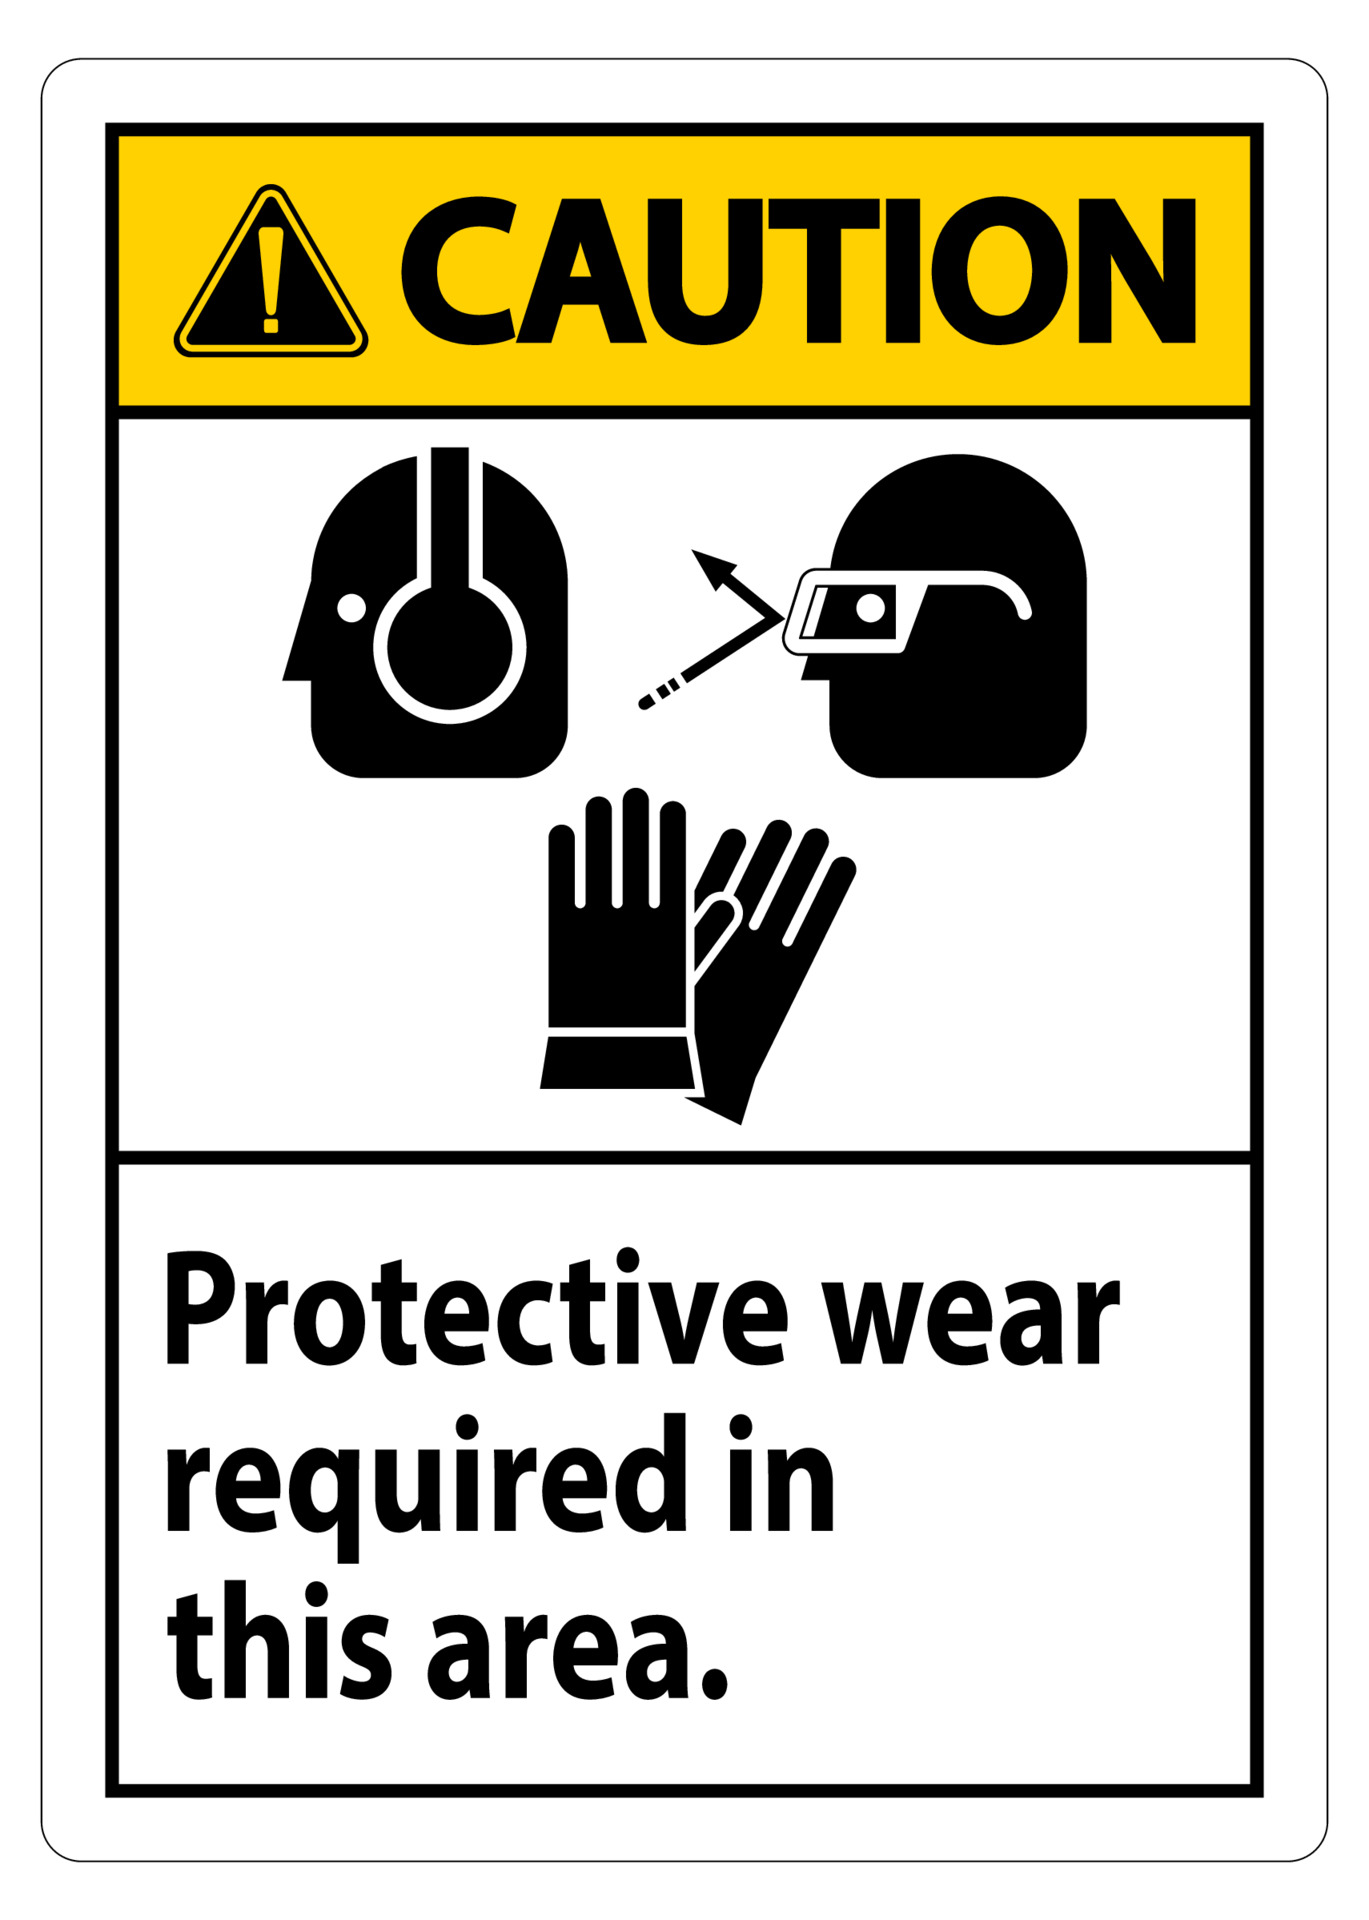 Caution Sign Wear Protective Equipment In This Area With PPE Symbols ...